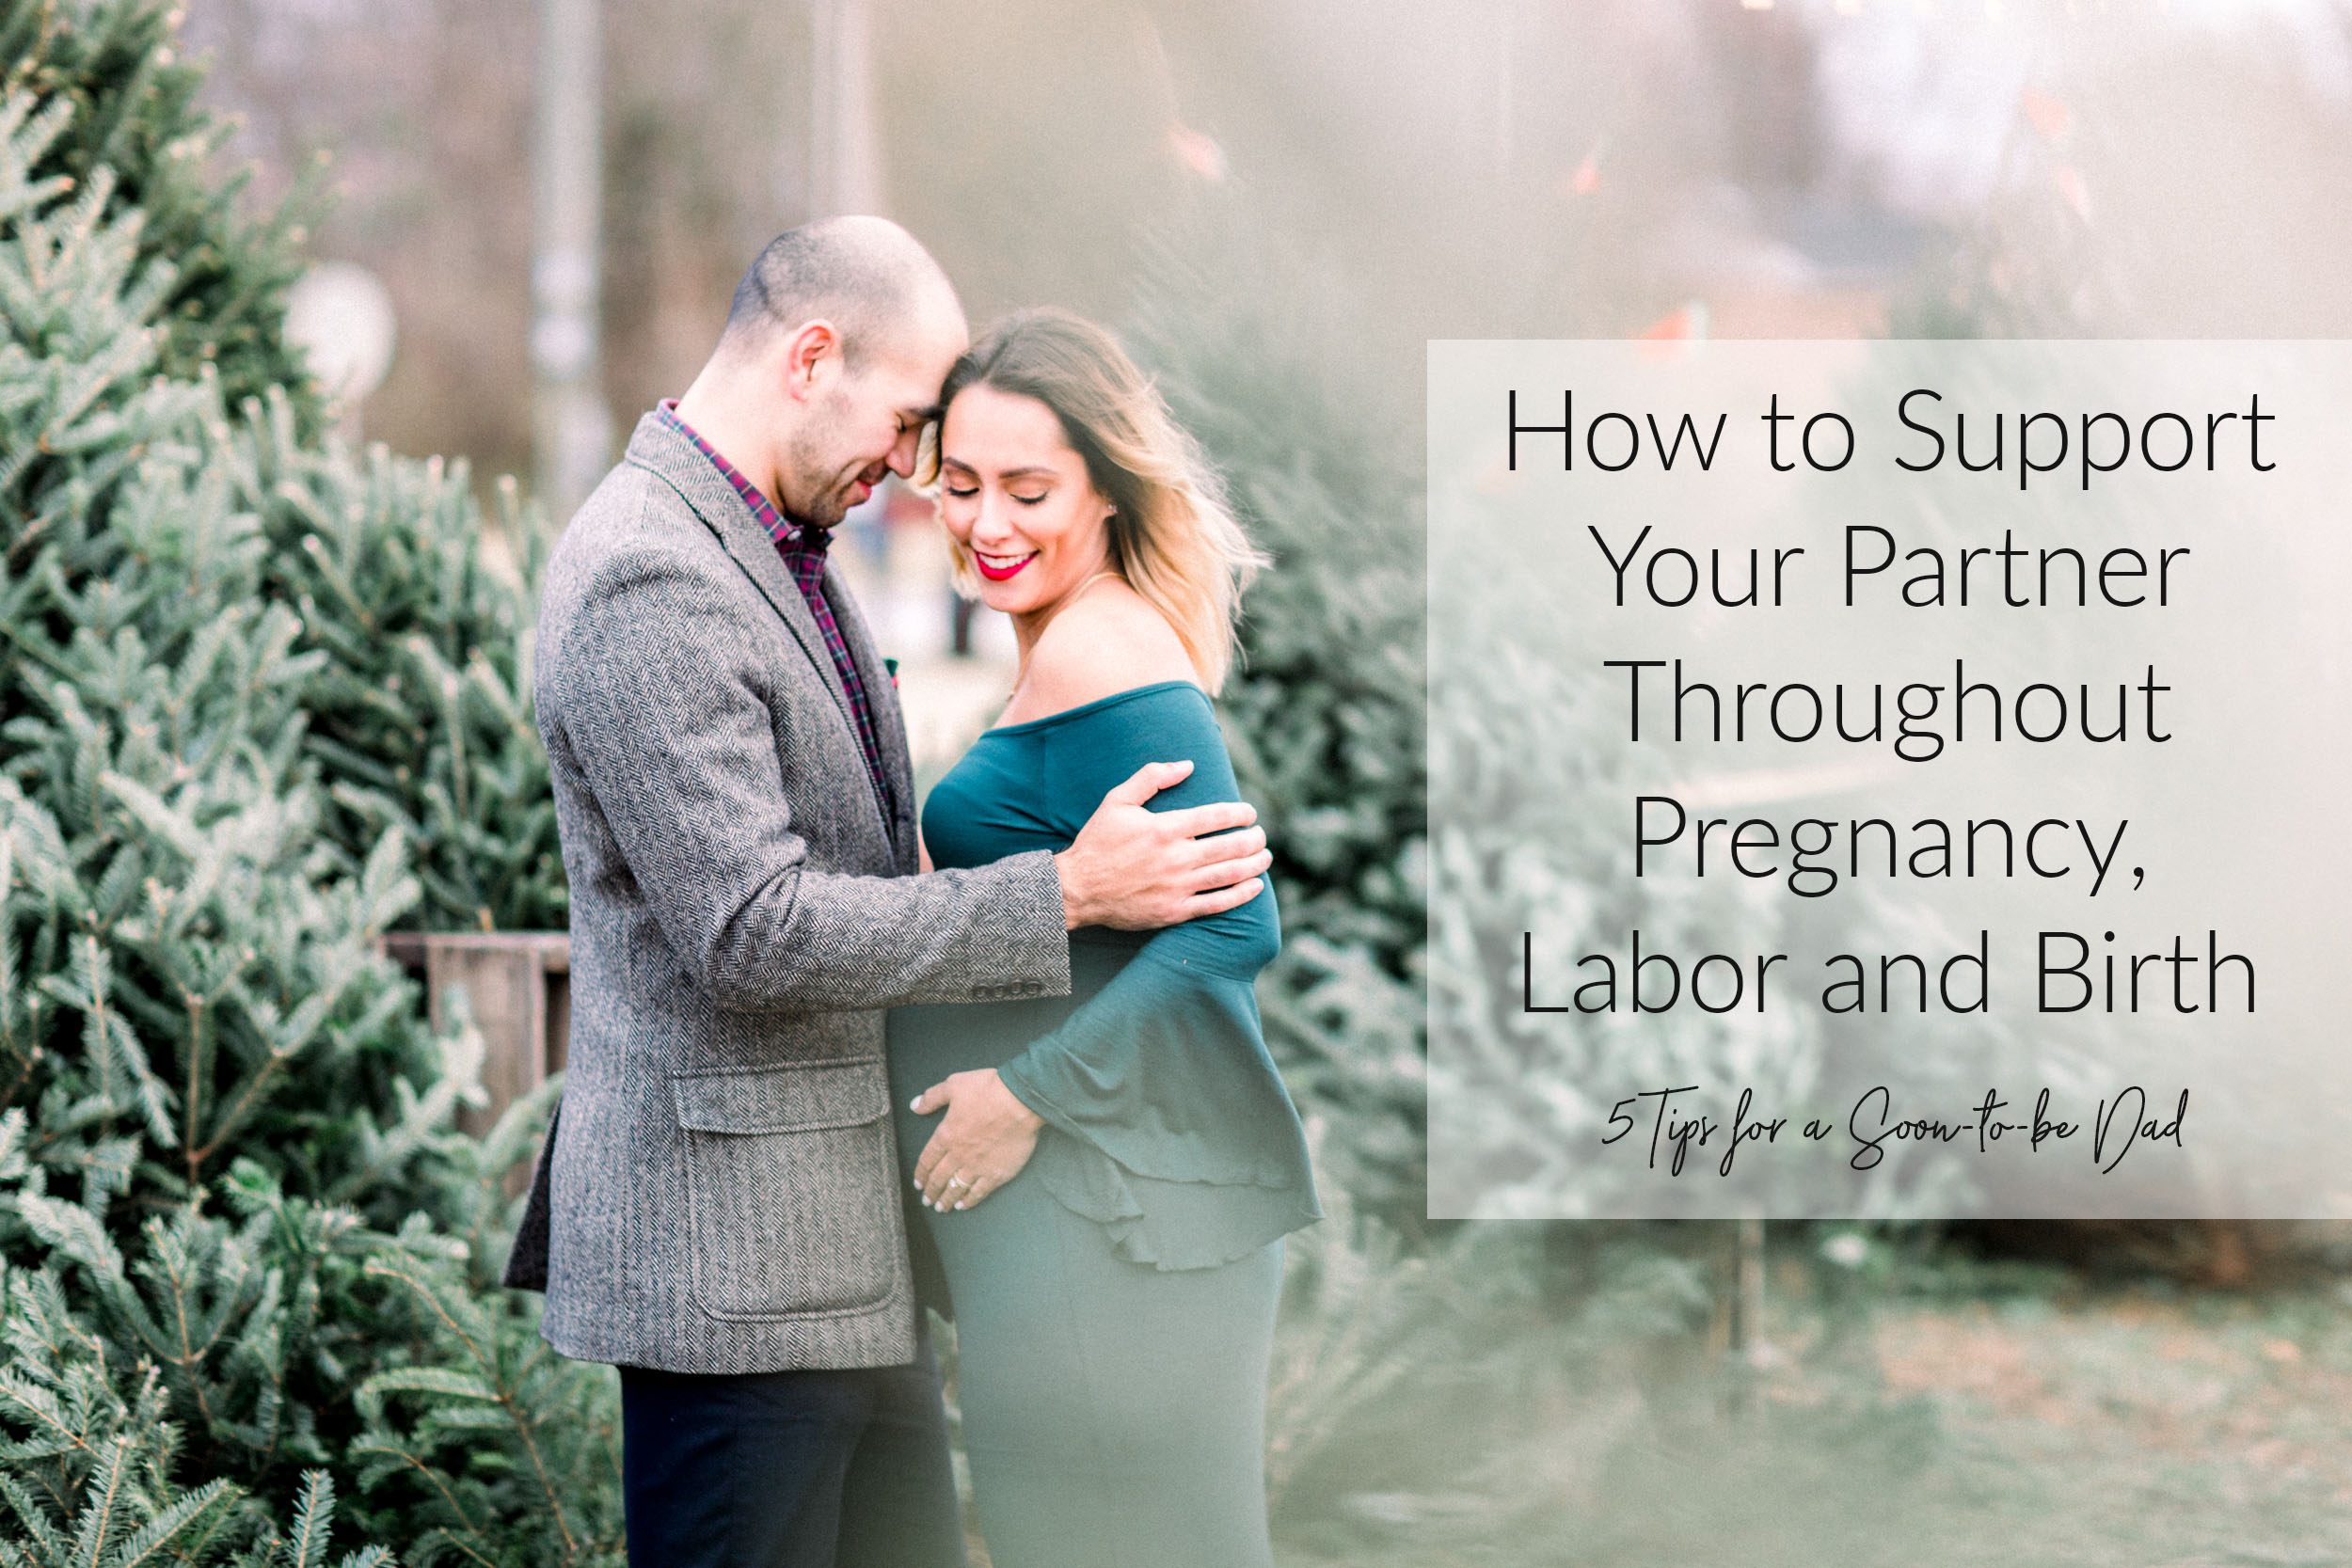 how to support your partner throughout pregnancy, labor and birth